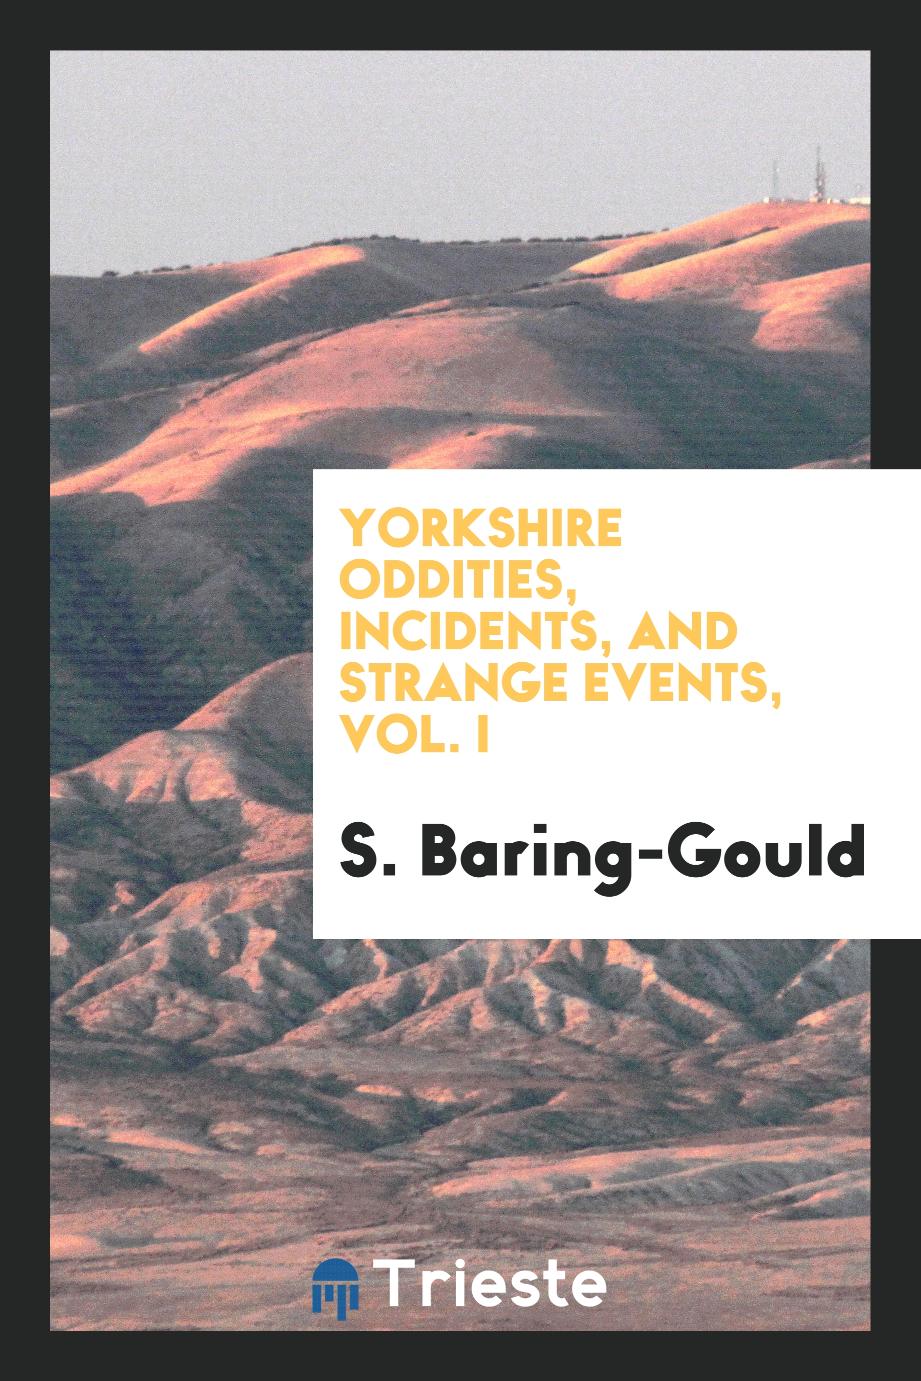 Yorkshire oddities, incidents, and strange events, Vol. I